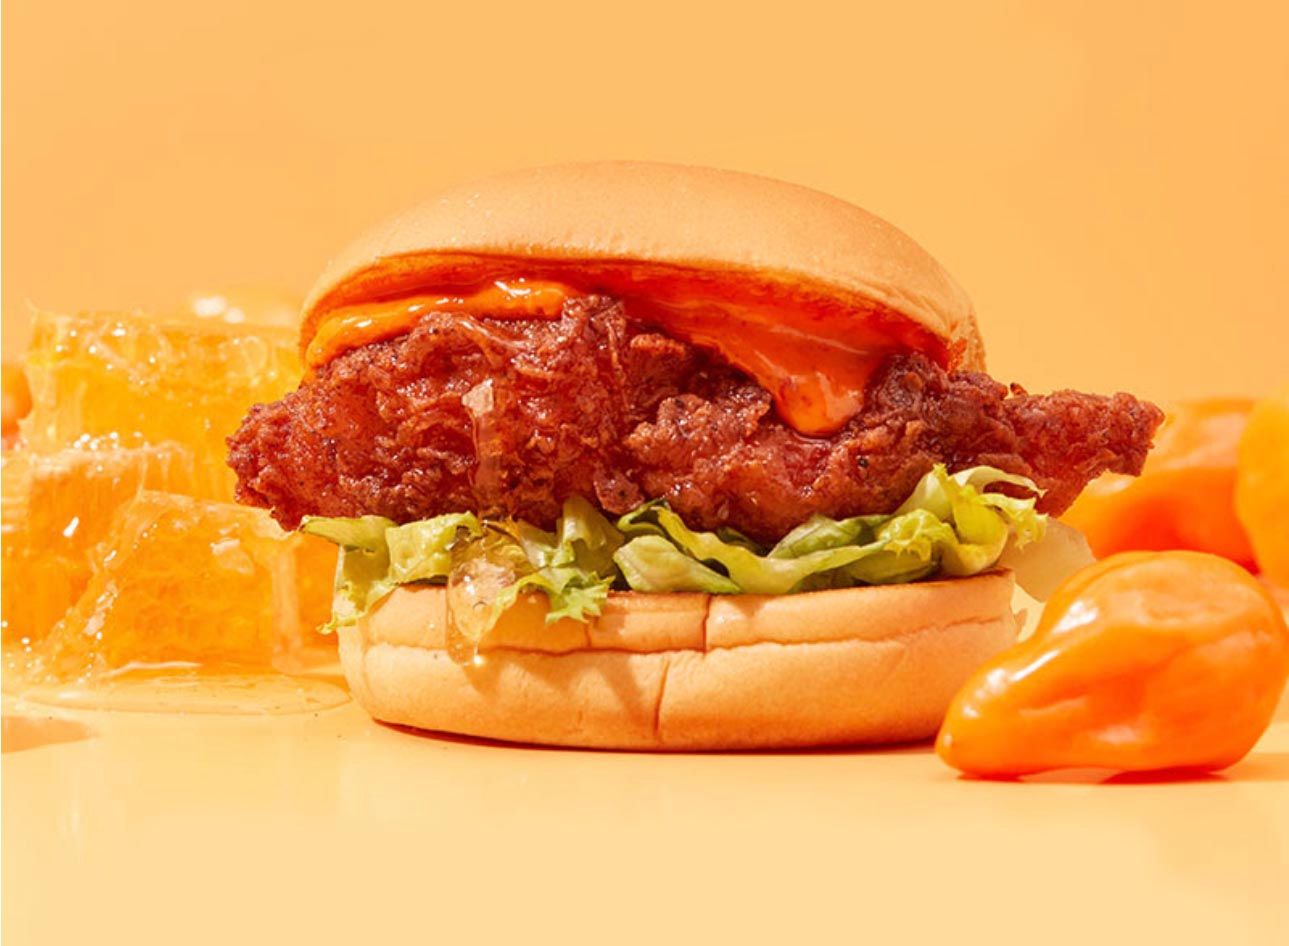 The Hot Honey Chicken Sandwich is Now Available at Shake Shack for a Limited Time